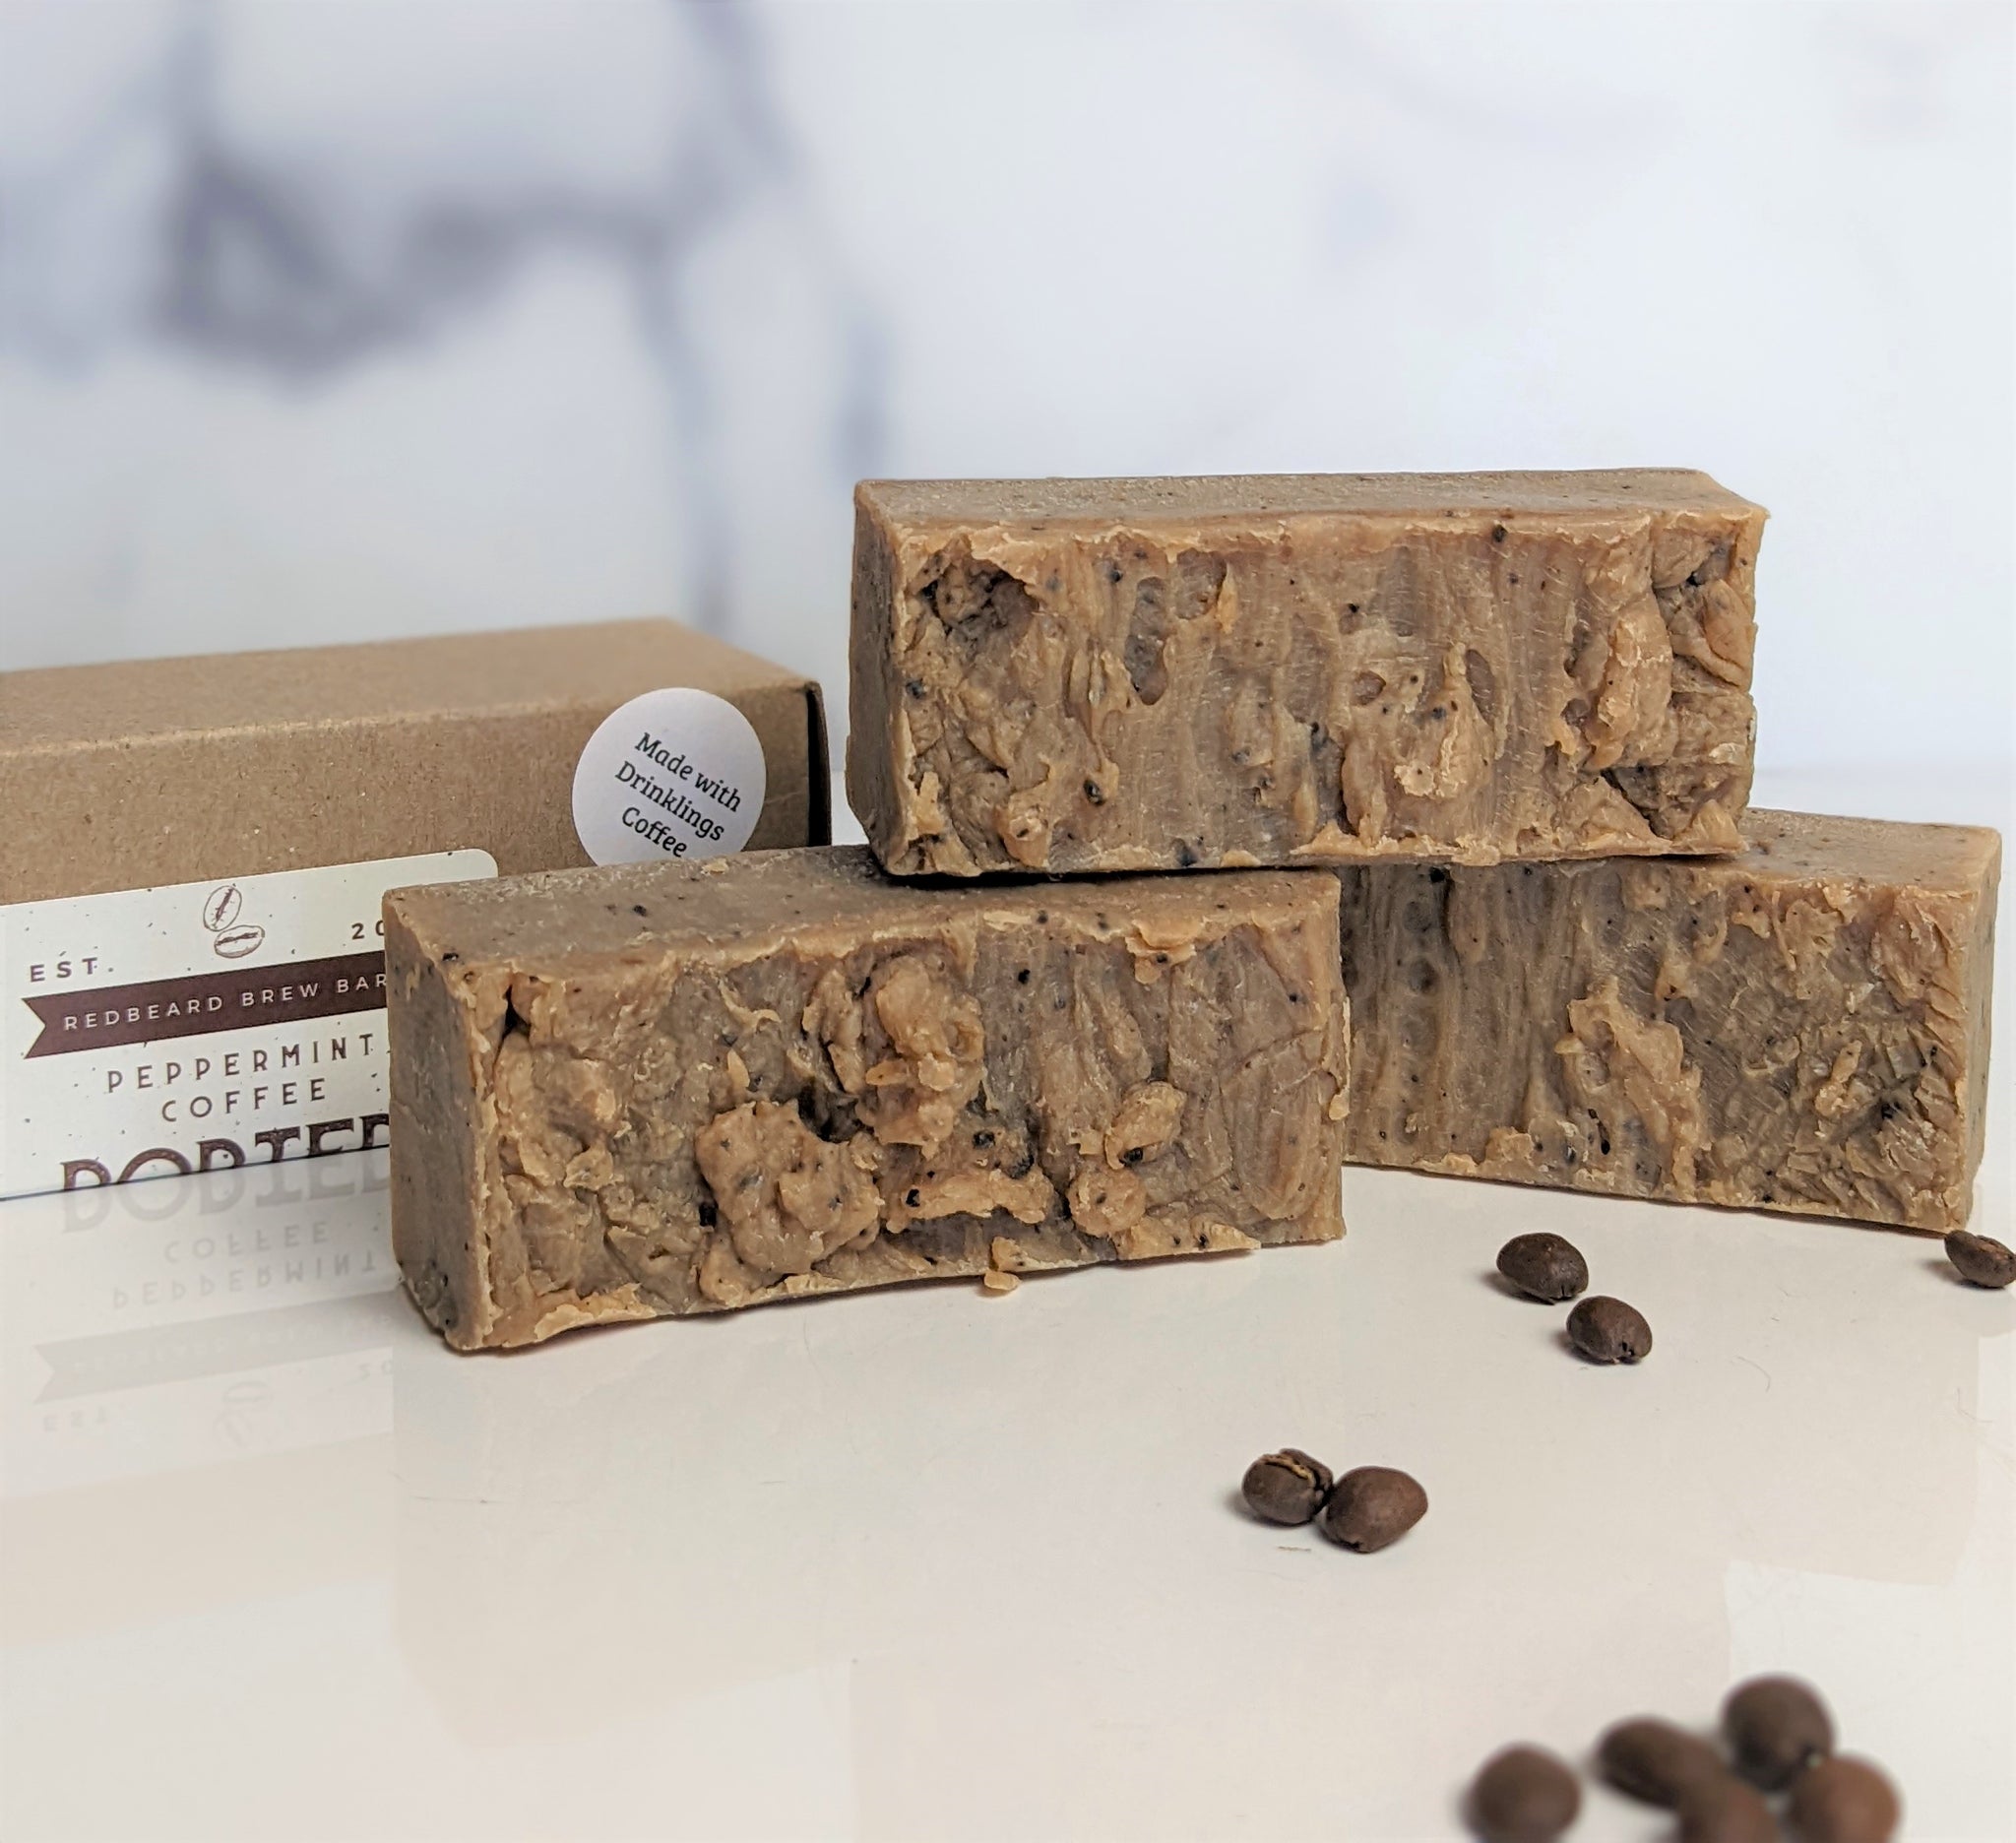 Peppermint Coffee Porter Soap (Made with Drinklings Coffee) - From Red Beard Brew Bars